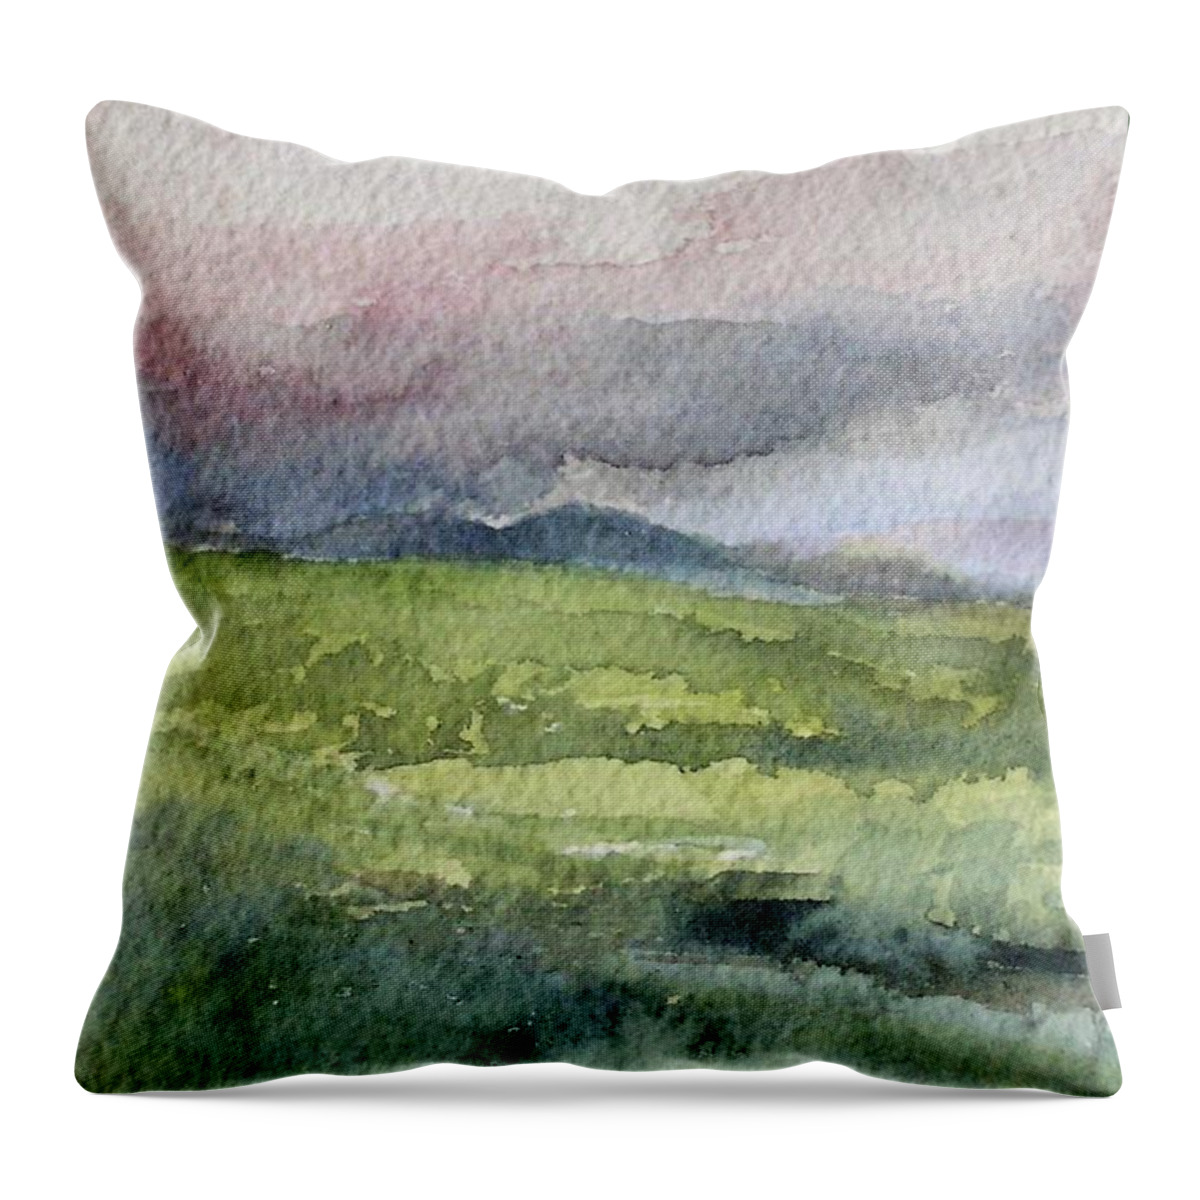 Watercolor Throw Pillow featuring the painting Stormy Skies by Laurie Rohner